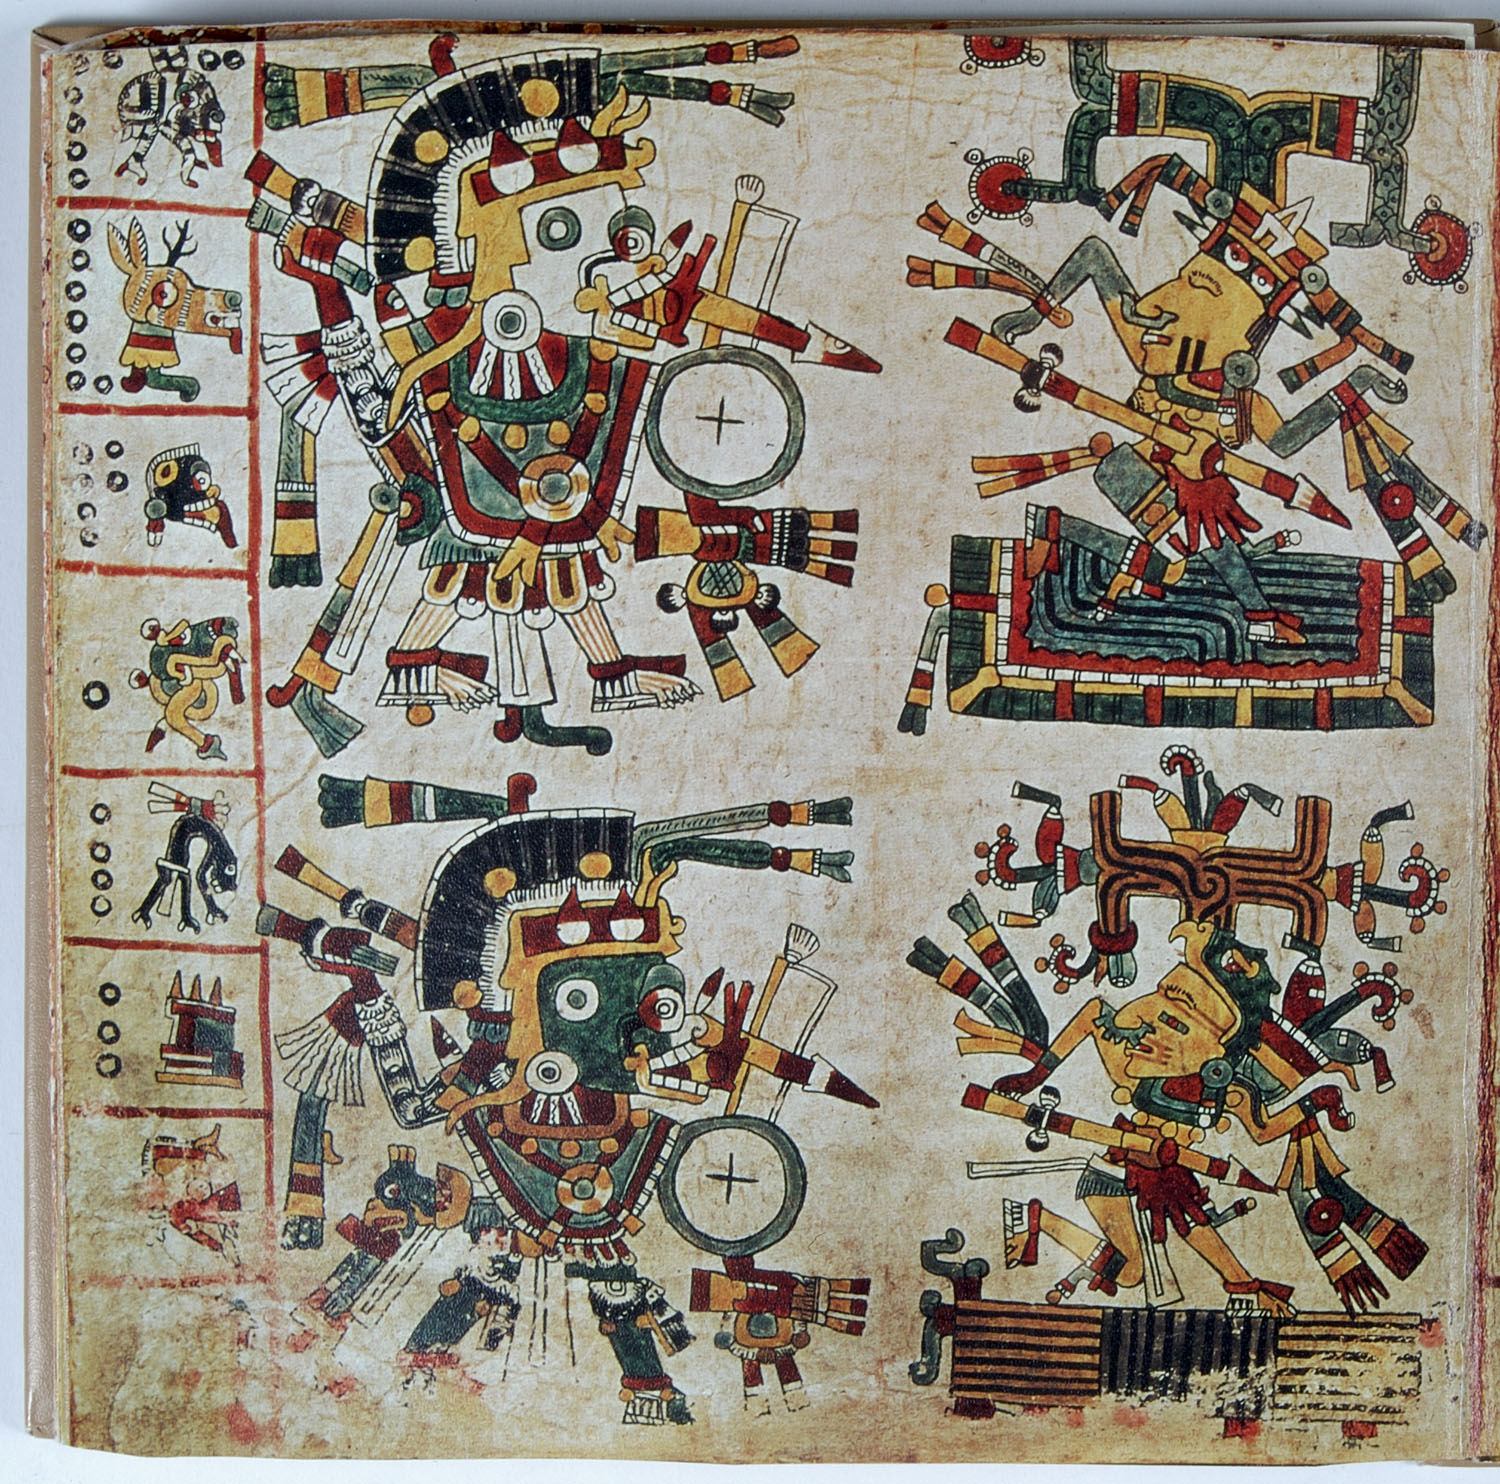 A page from the Codex Copsi